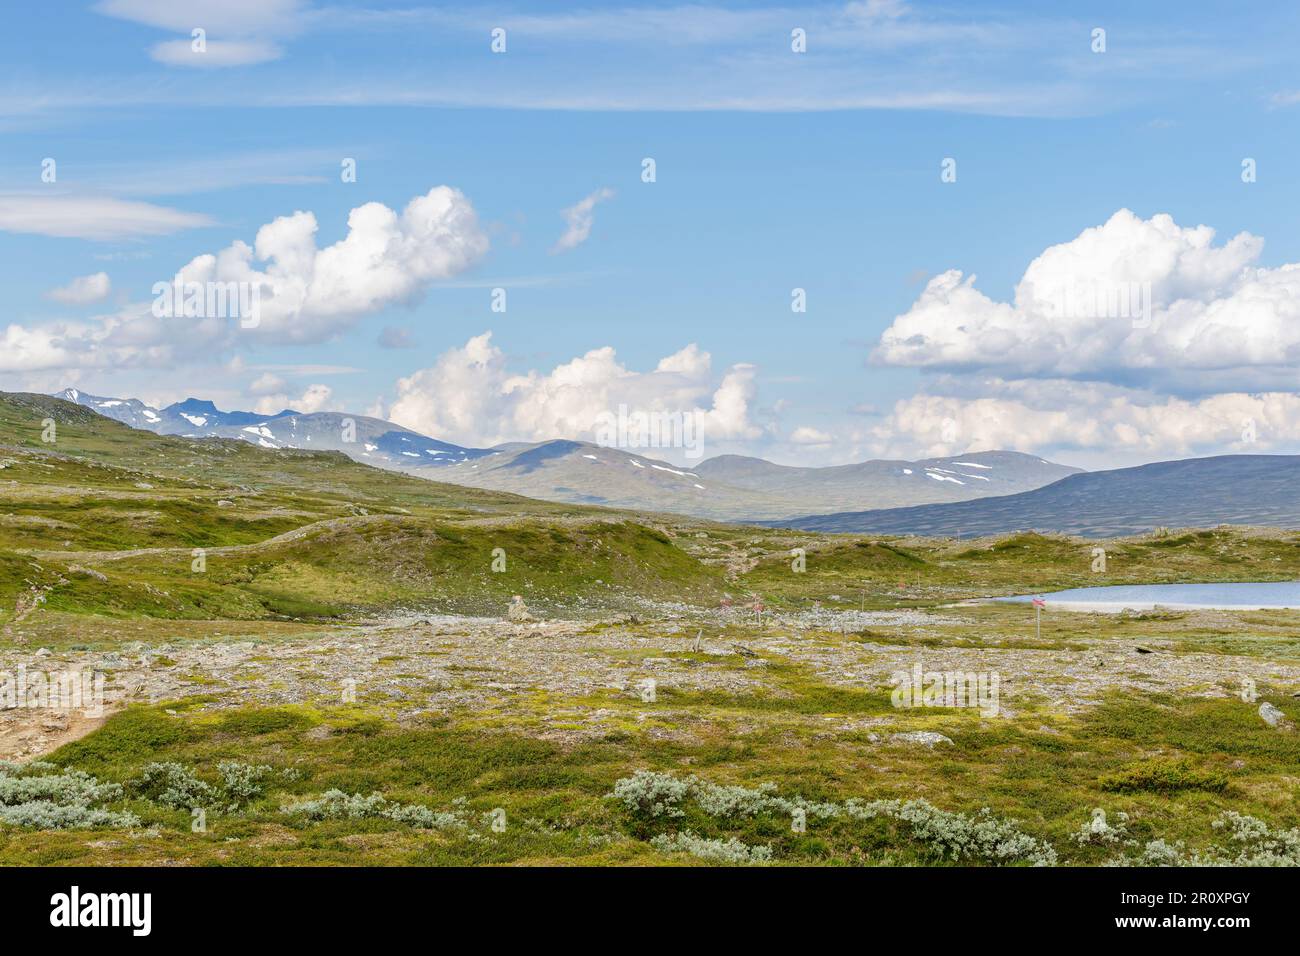 Mountainous landscape view with a footpath and a lake Stock Photo